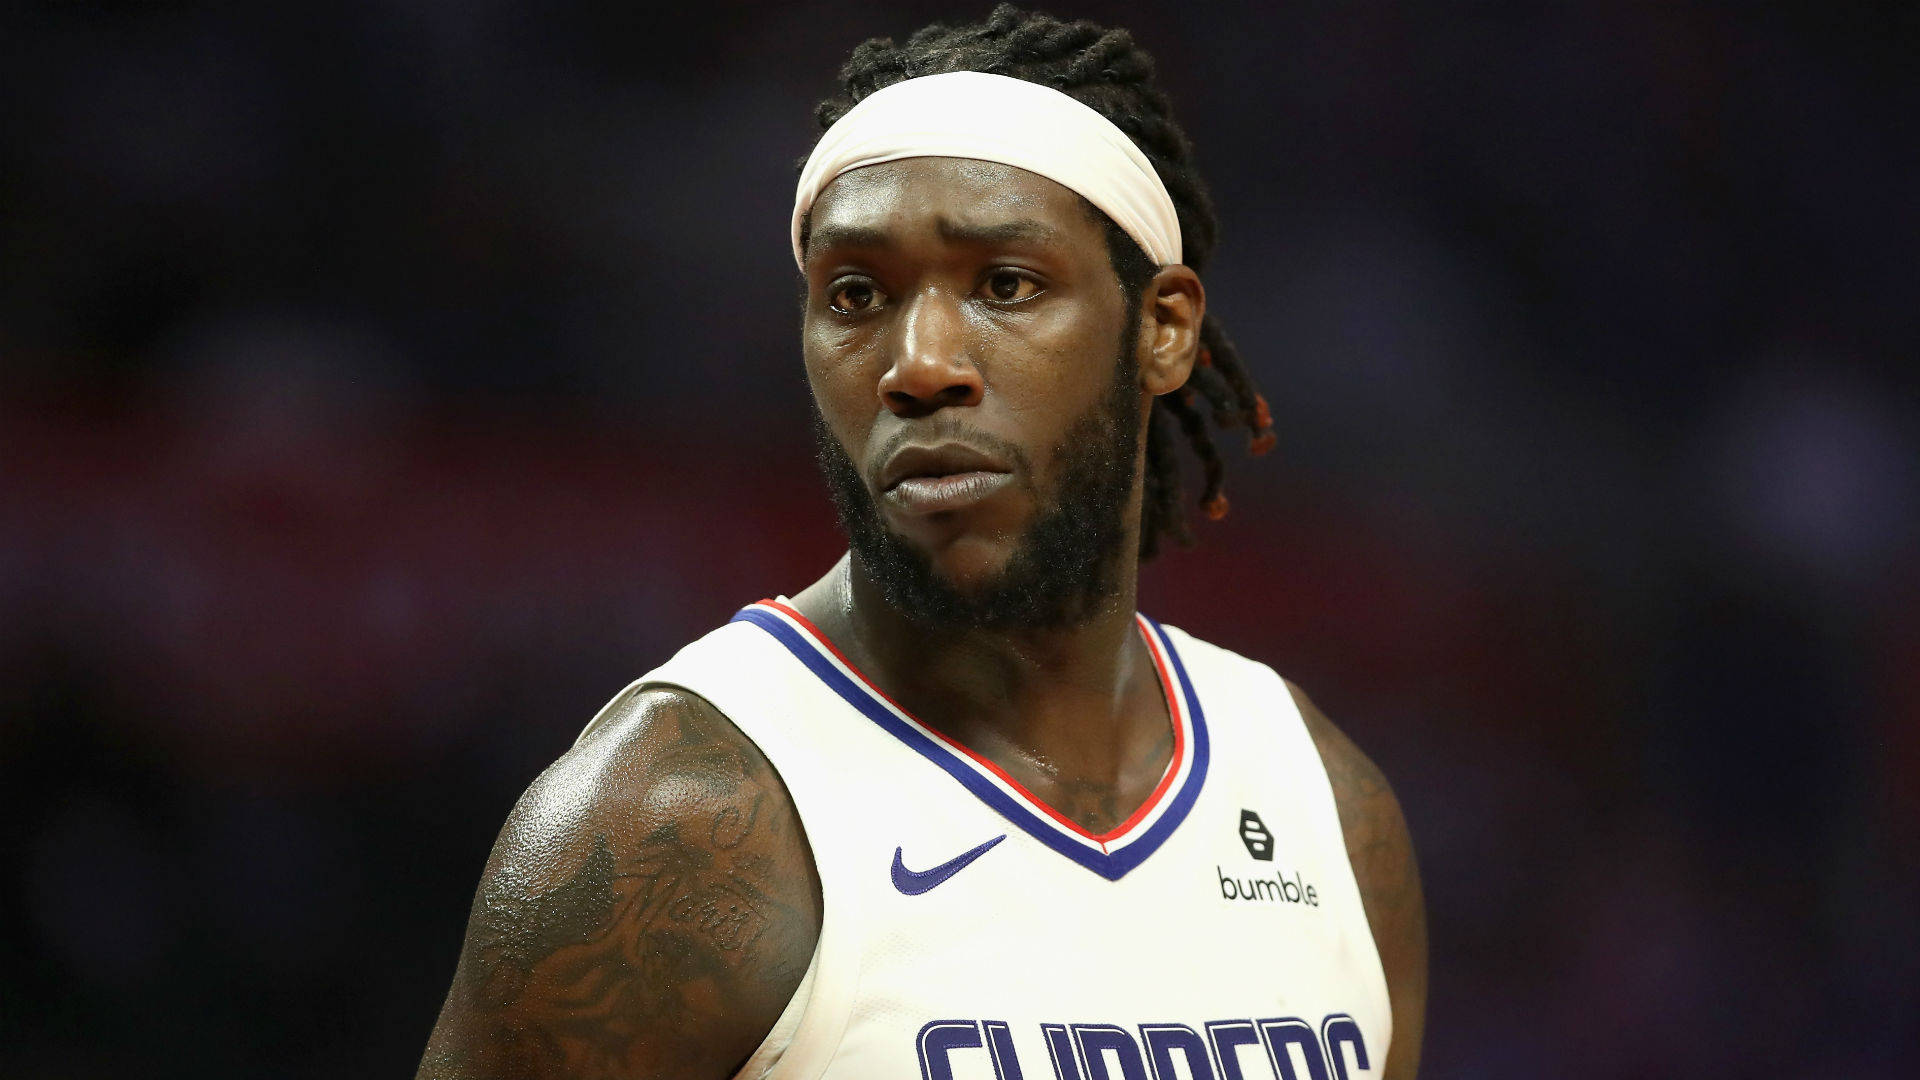 Serious Look Of Montrezl Harrell